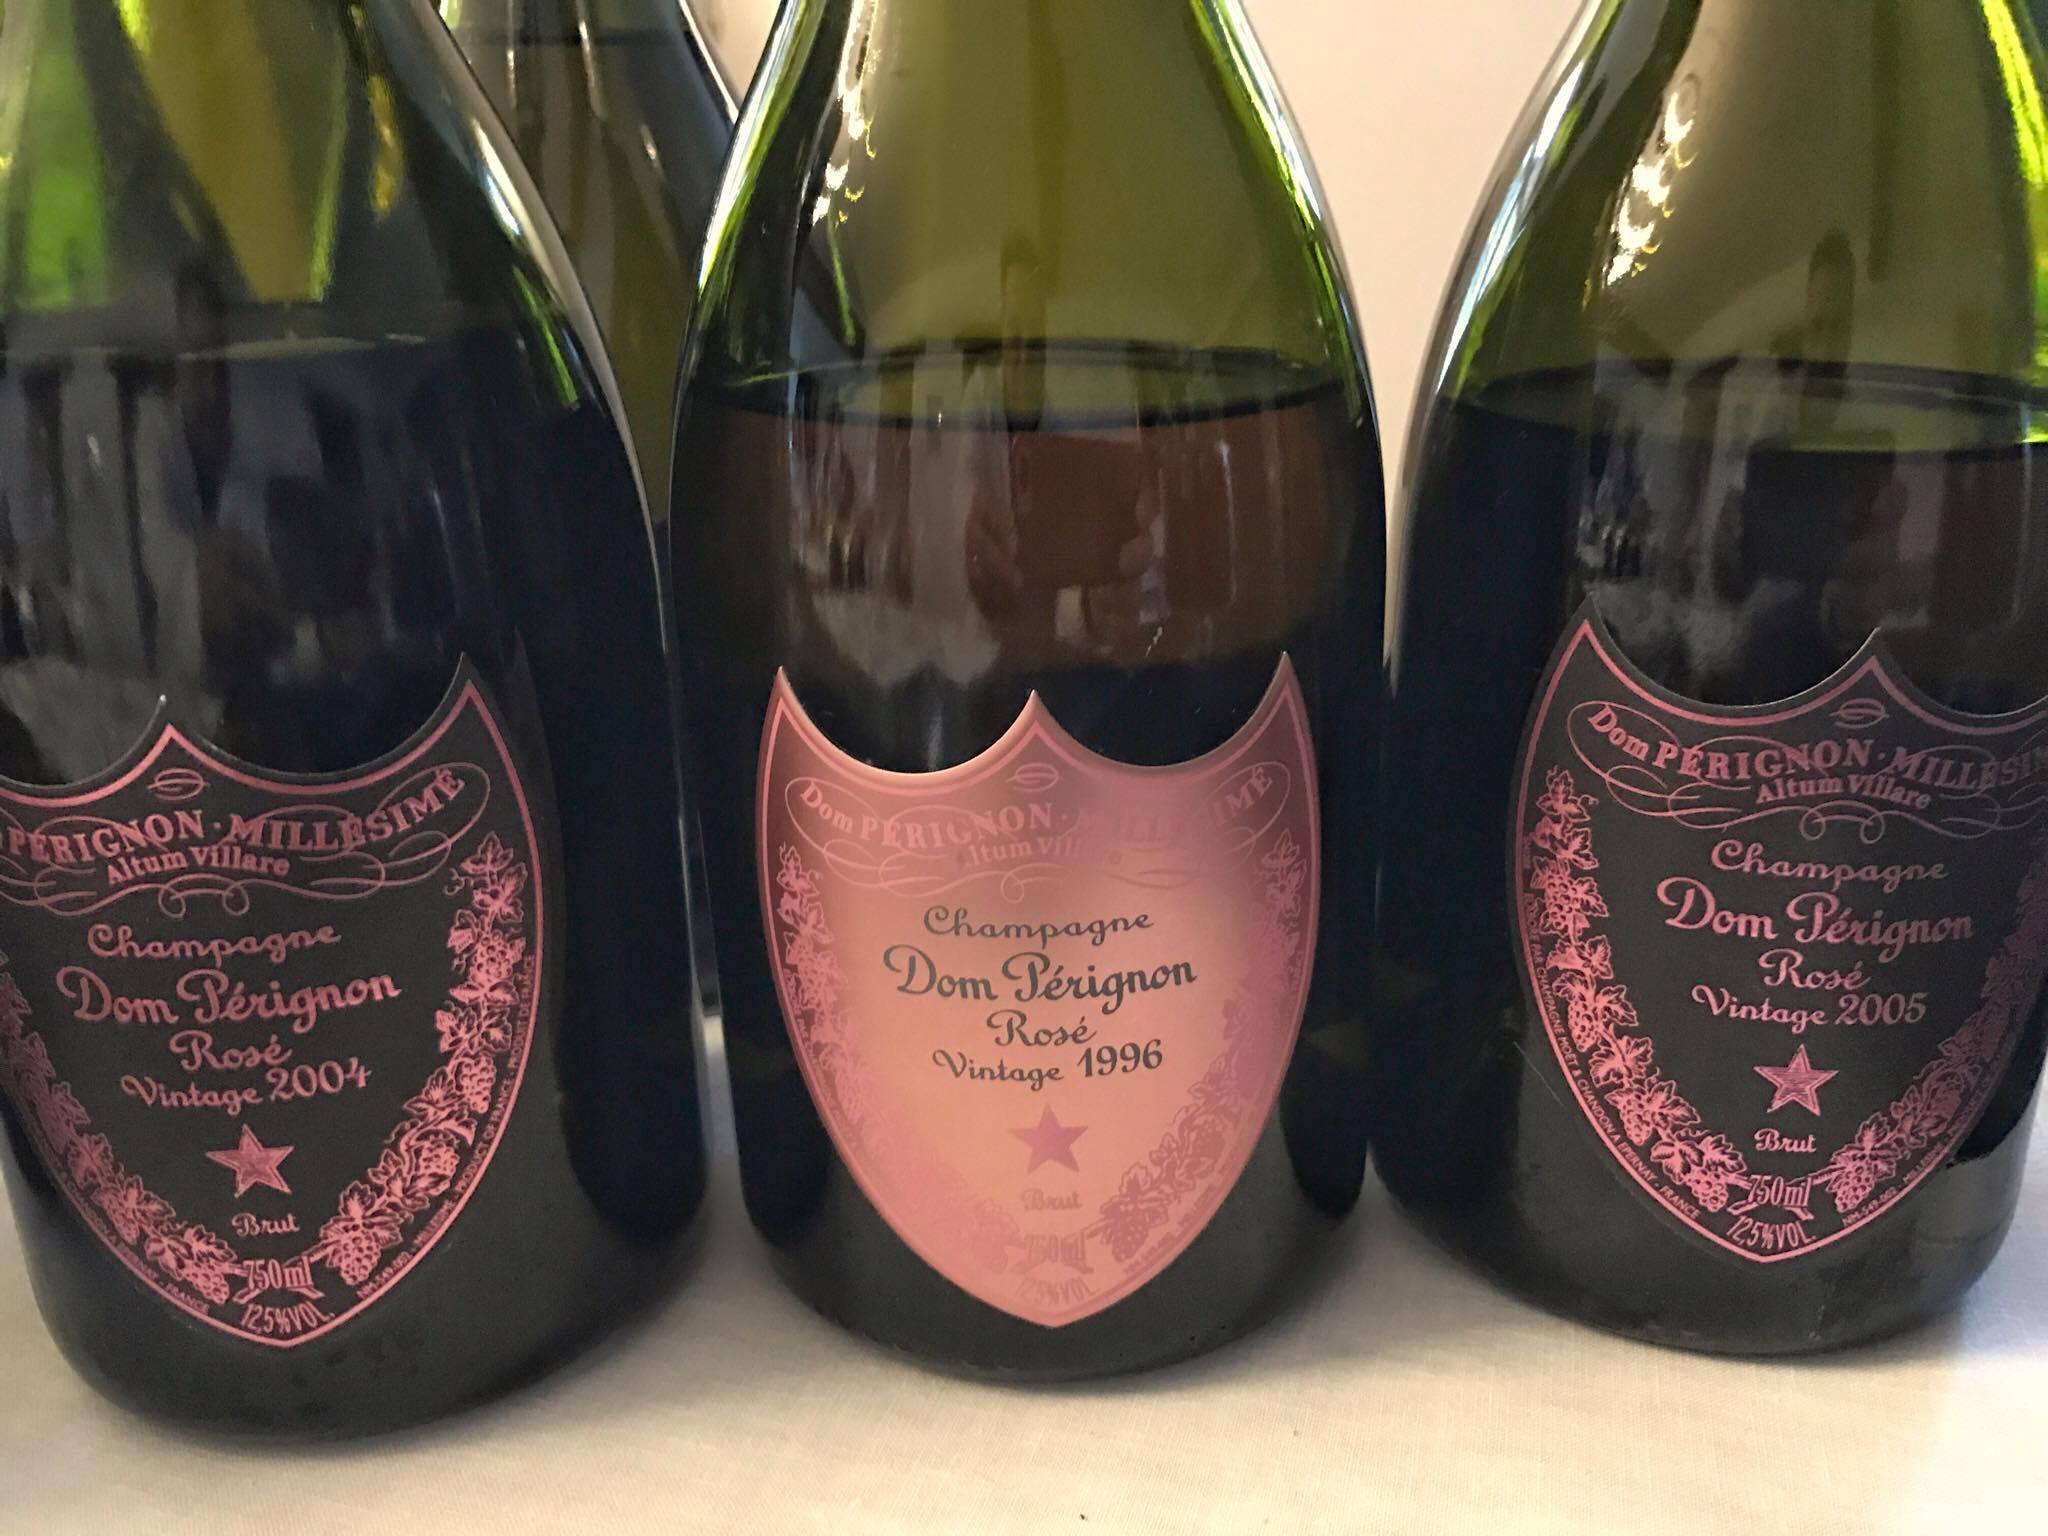 A taste of Dom Perignon at the Abbaye d'Hautvillers